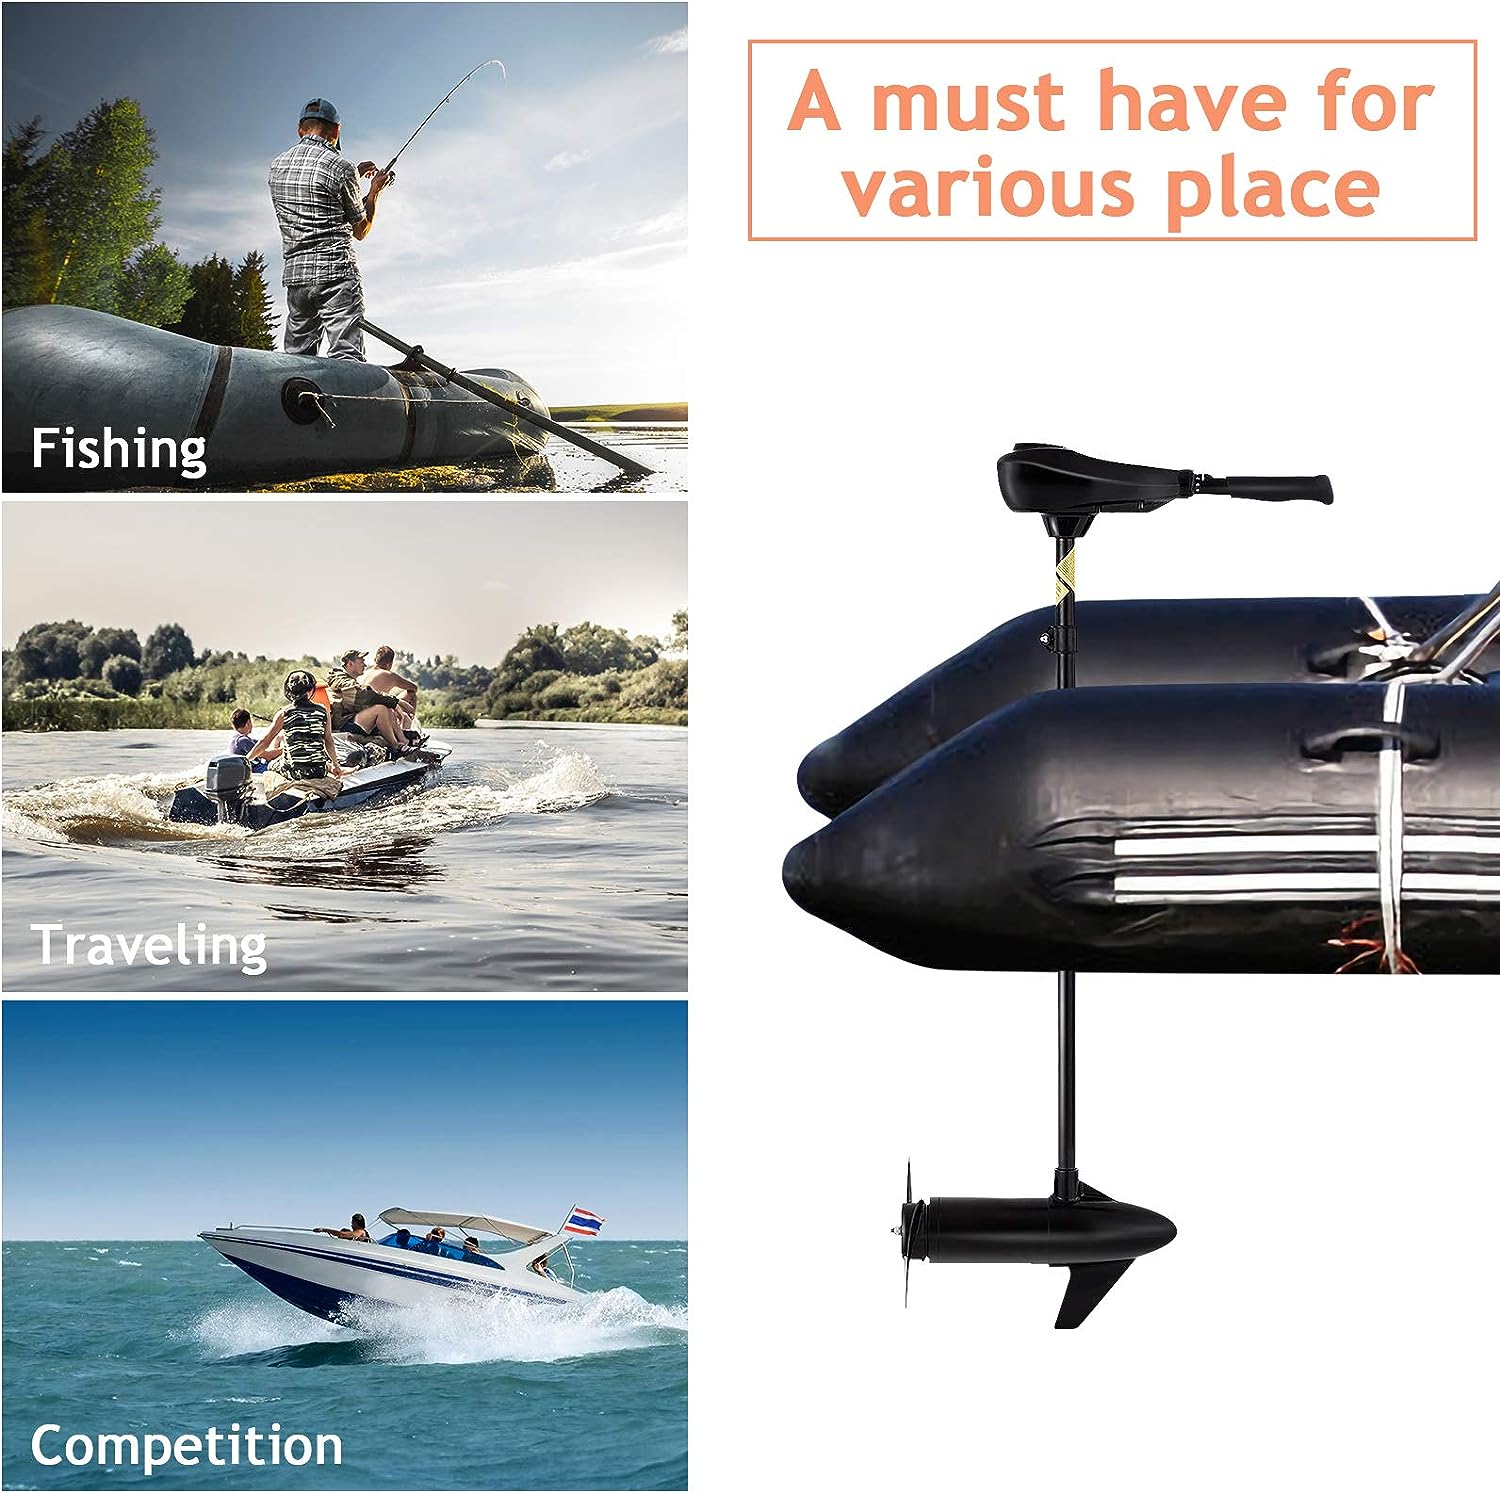 8 Speed Electric Trolling Motor Boat Fishing Motor with 36 Shaft and 2-bladed Propeller for Freshwater Saltwater